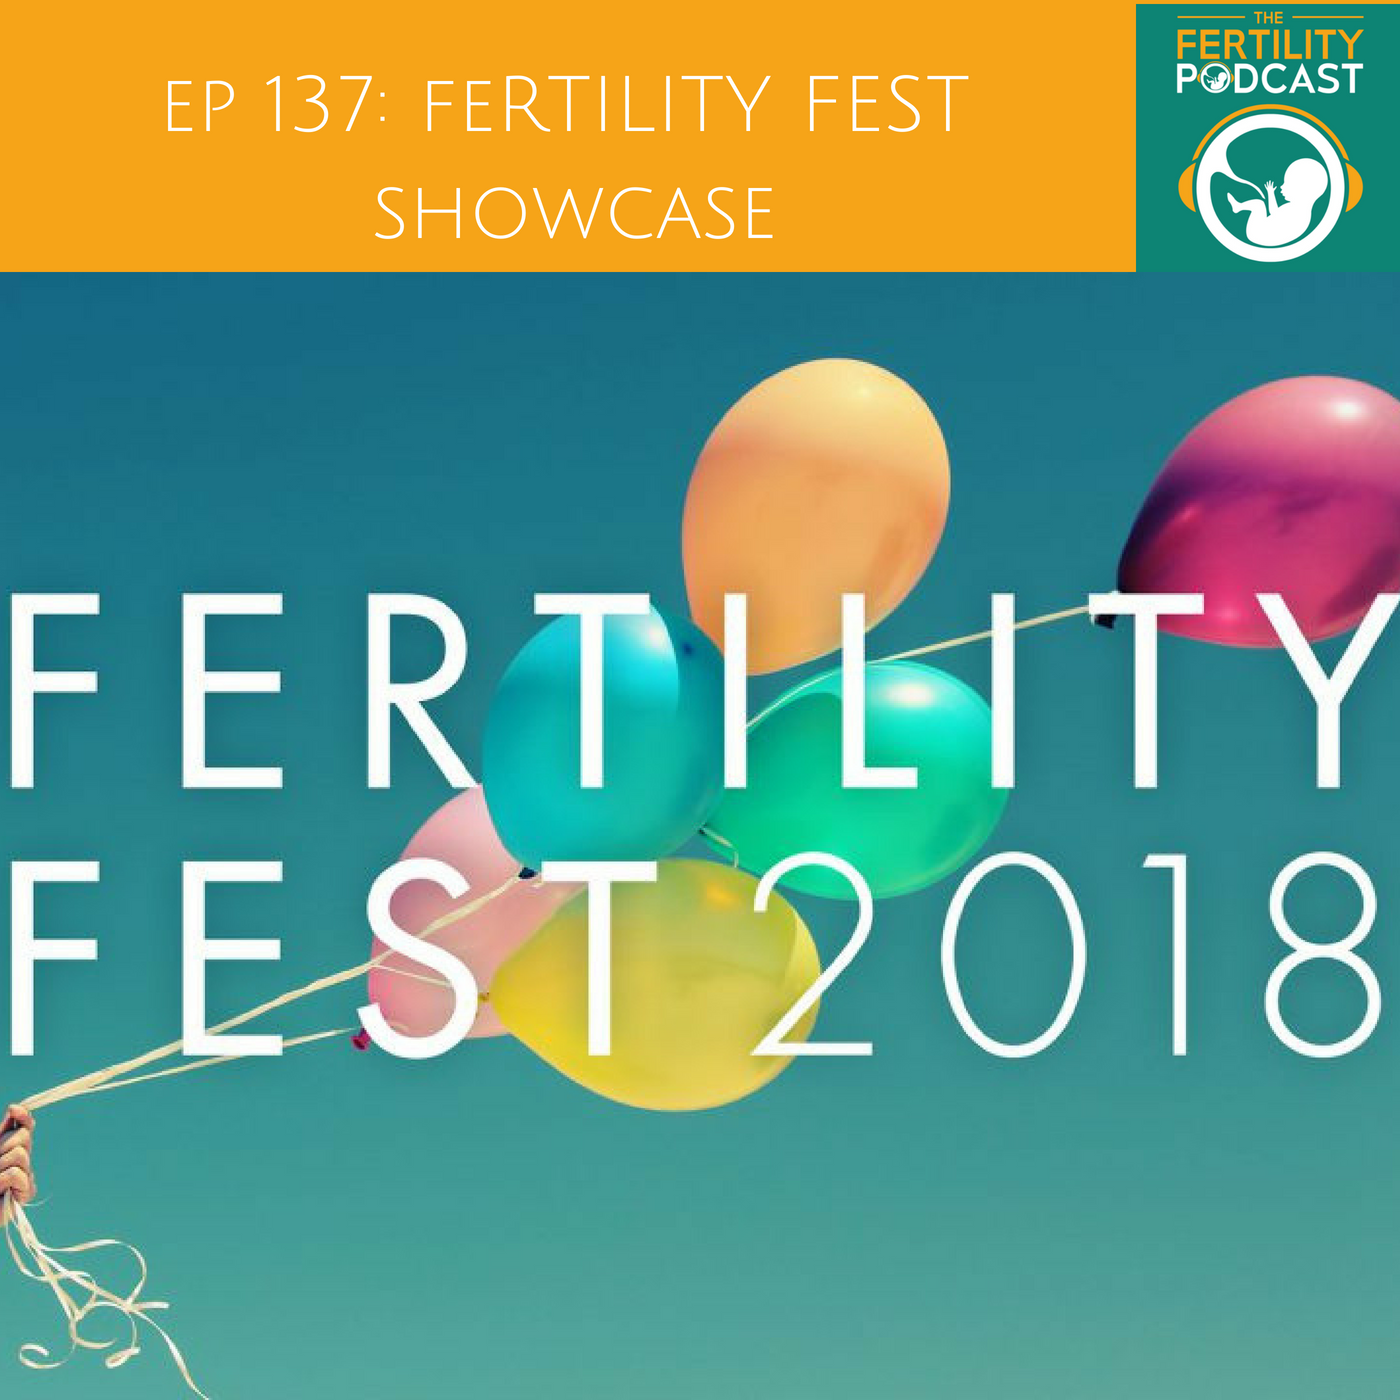 Hear A Showcase Of The Brilliance From Fertility Fest 2018 • The